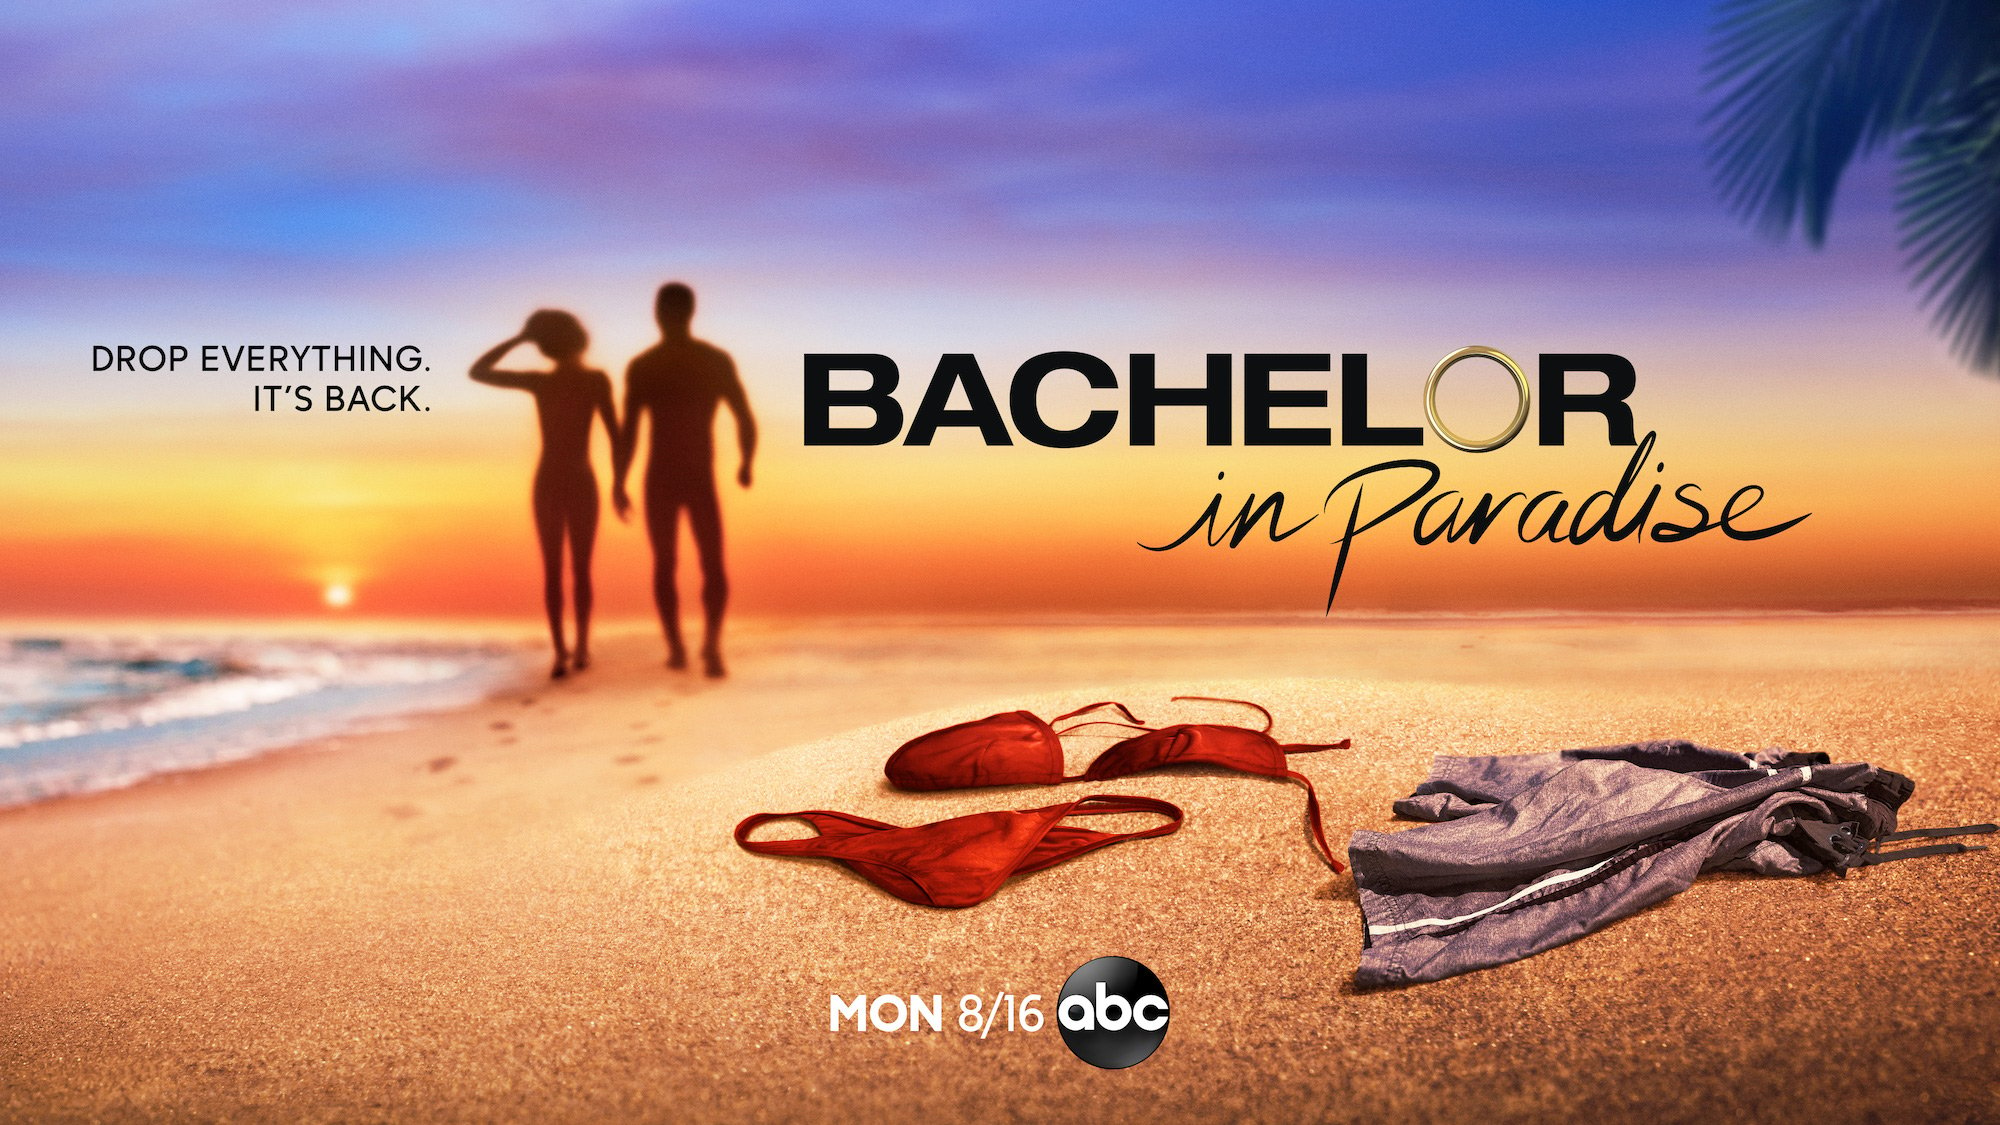 The 'Bachelor in Paradise' logo is seen here with the silhouette of two people walking on the beach. 'Bachelor in Paradise' often makes its cast up of current contestants from 'The Bachelor.'